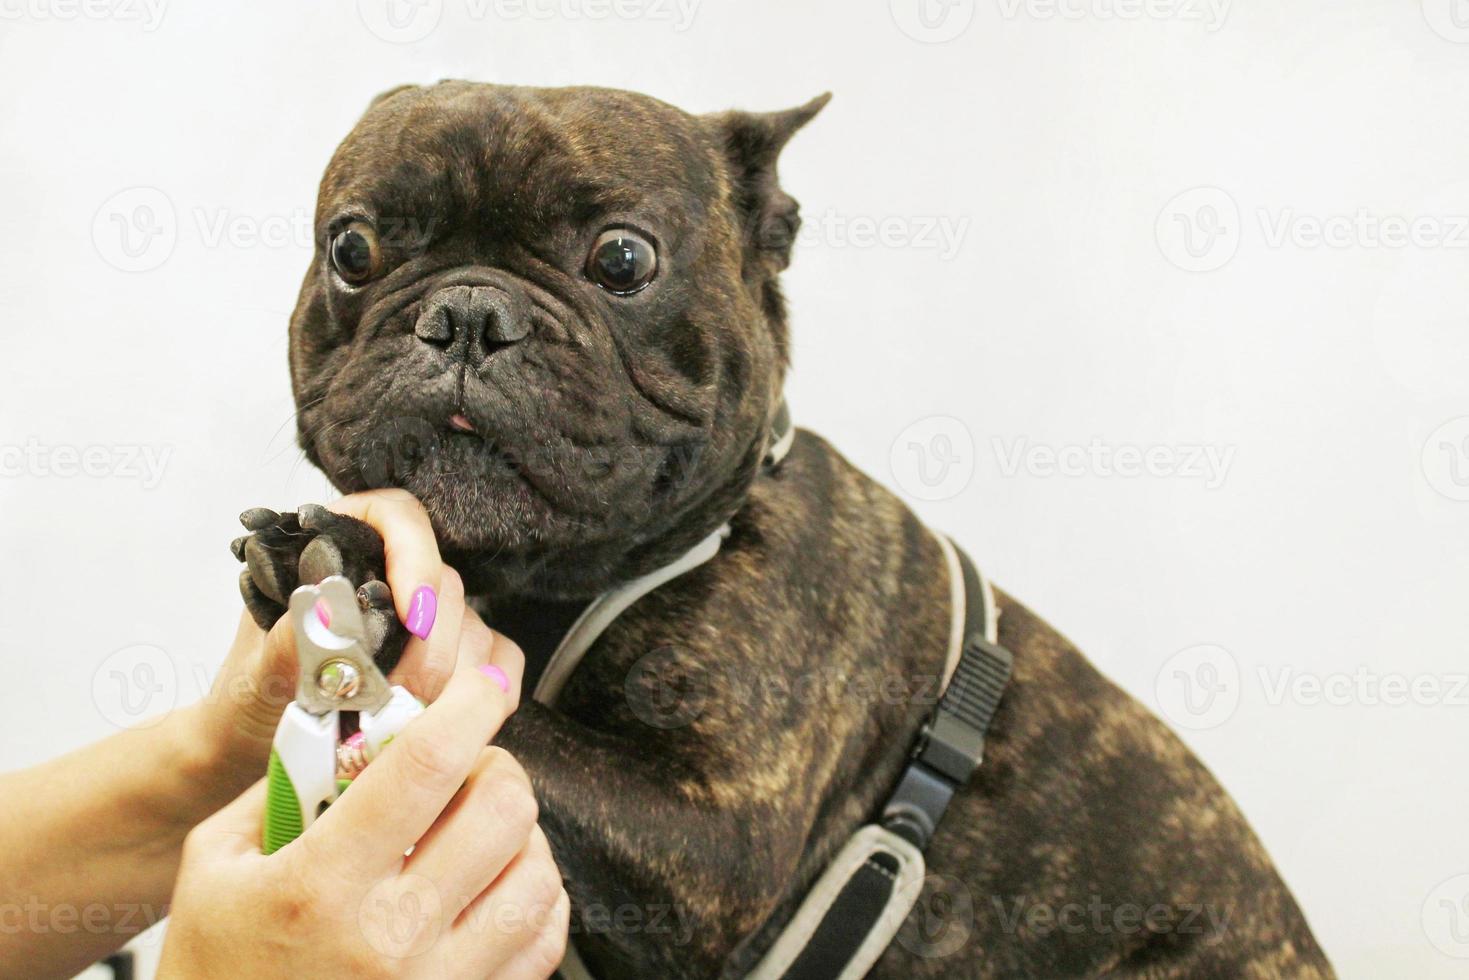 Woman hands of groomer clipped nails of french bulldog. Polish claws, trimming, cutting, manicure of pets concept. Animal hygiene care. Professional beauty procedure in grooming salon. Close-up photo